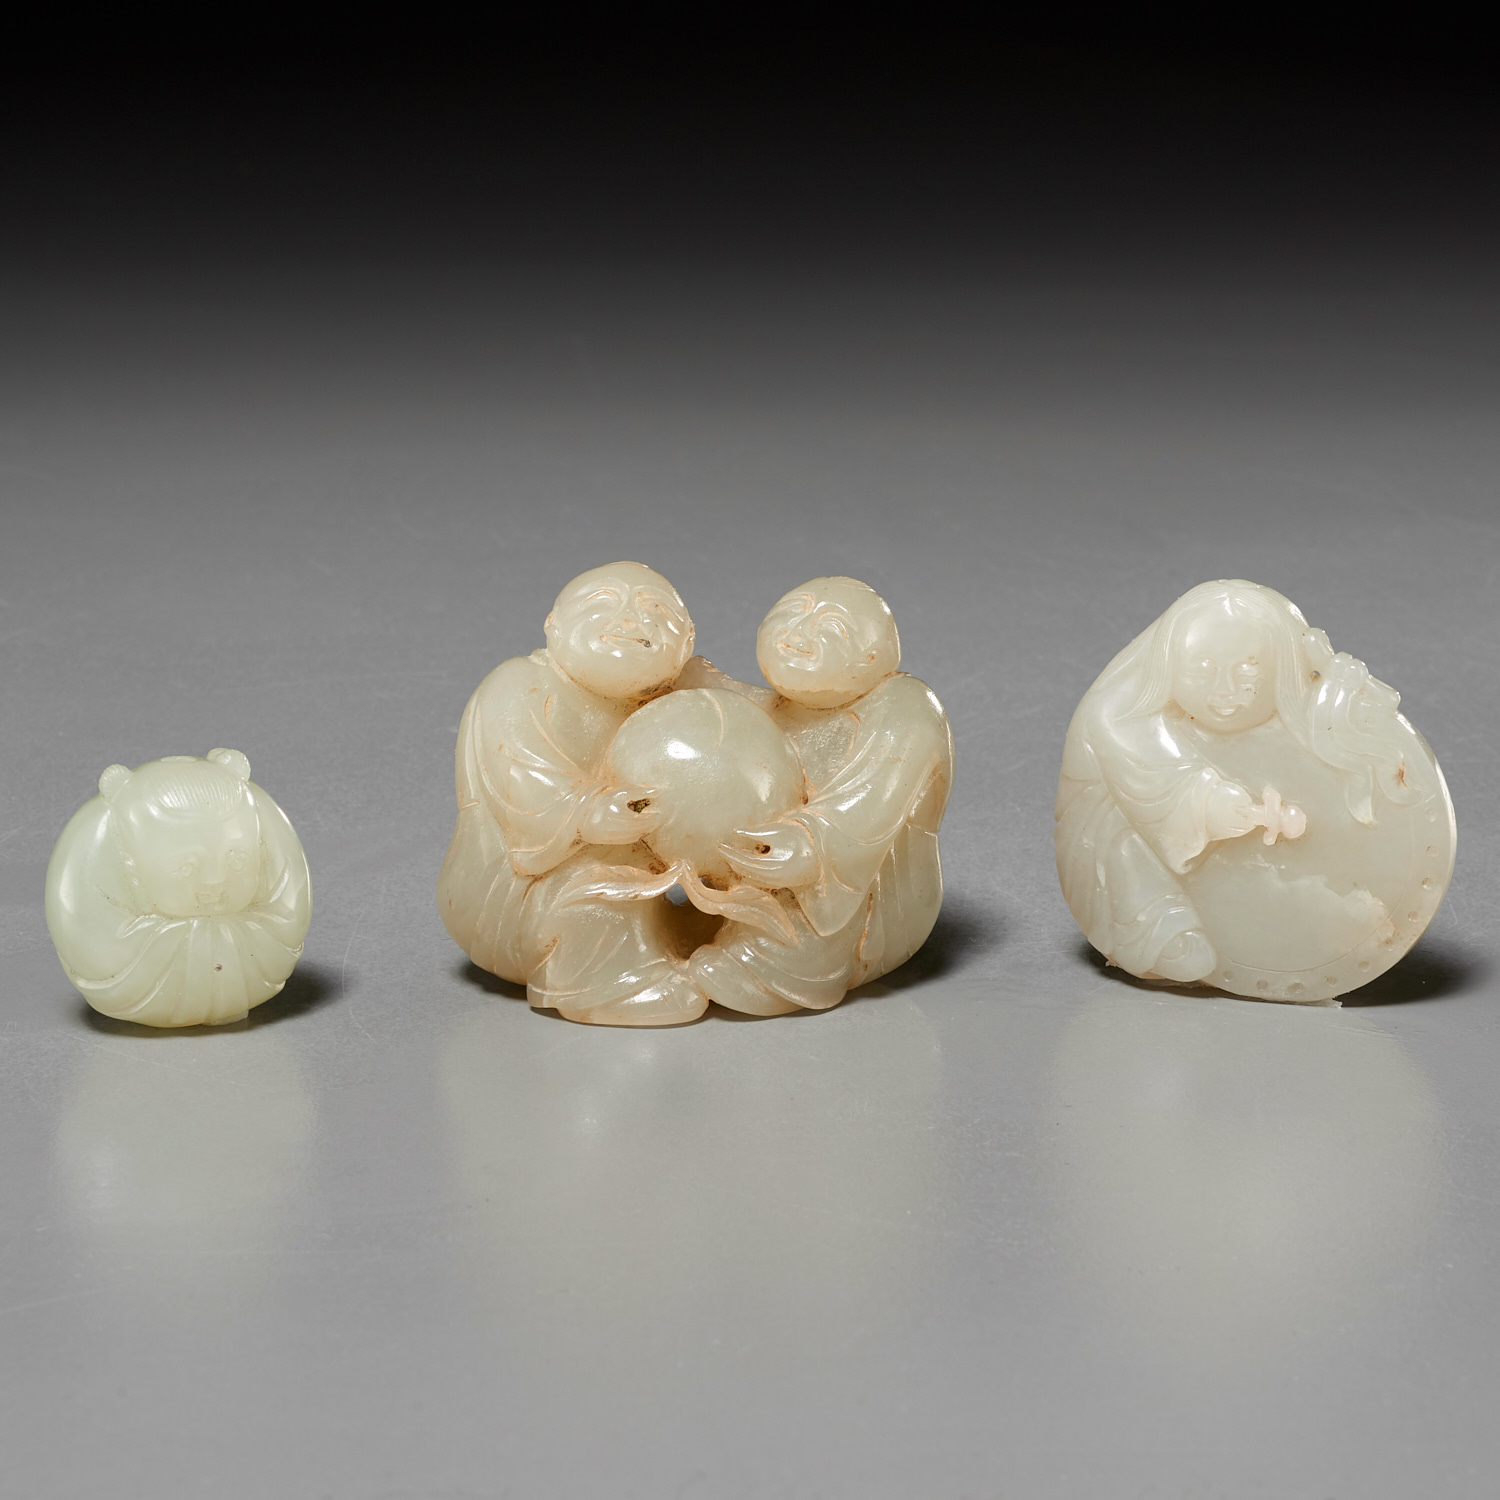  3 CHINESE CARVED JADE TOGGLES 3625ae